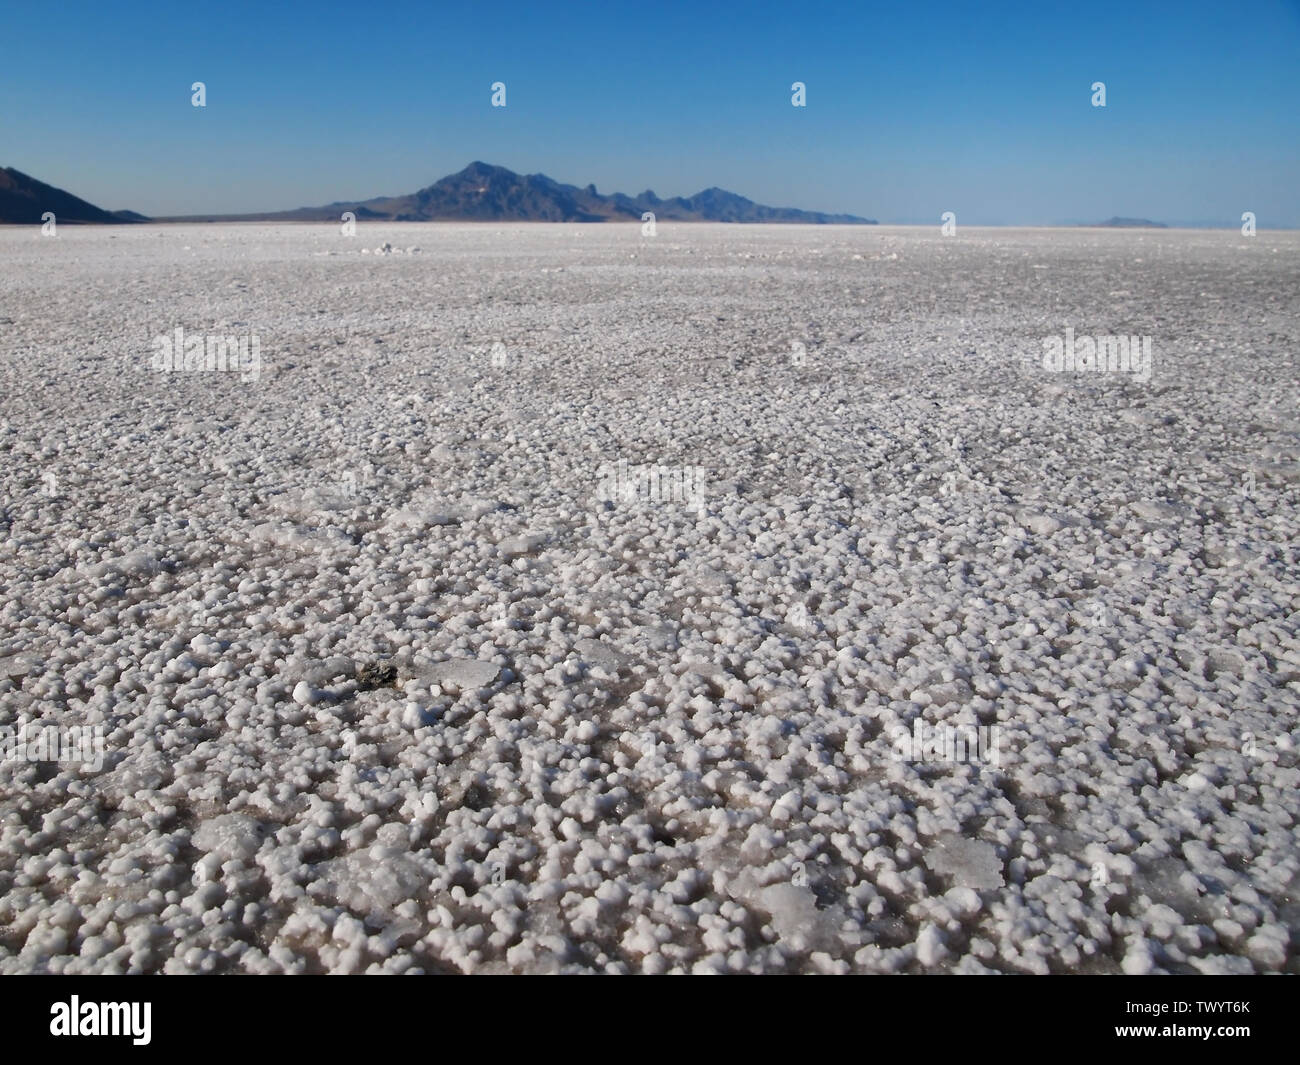 Closeup at ground level, looking out across the vast  Bonneville Salt Flats, with mountains far in the distance, the horizon appears to curve. Stock Photo